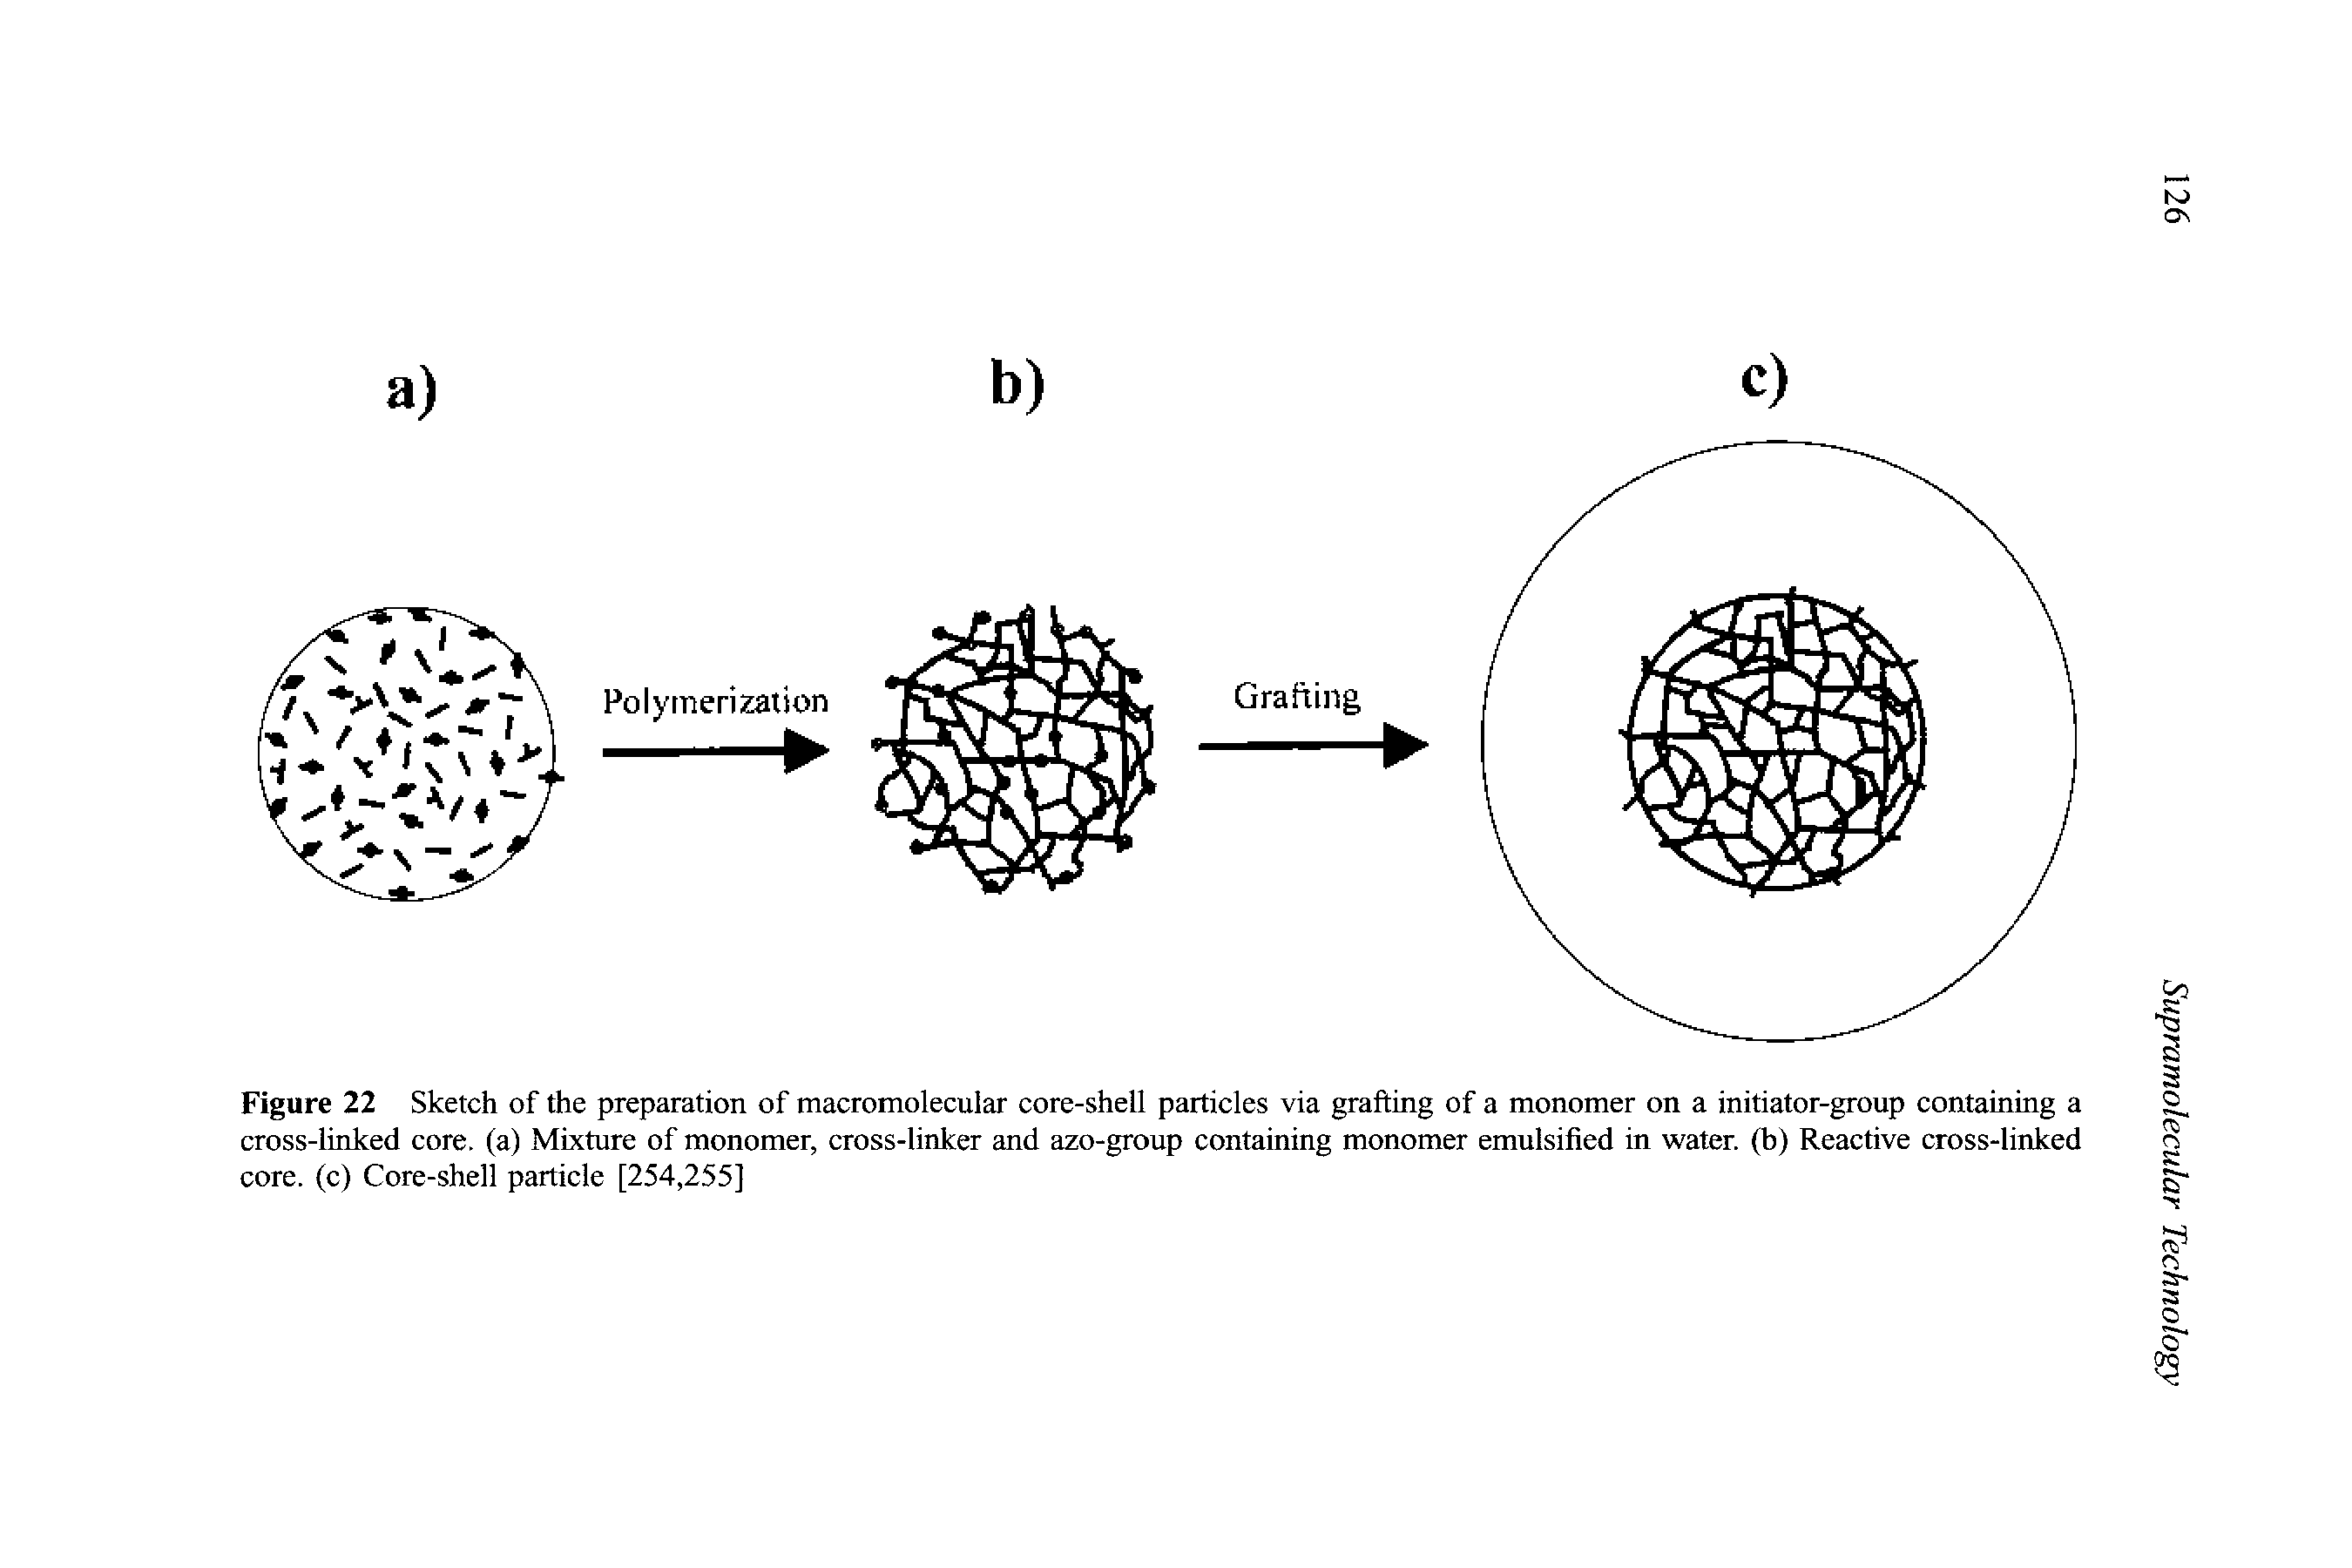 Figure 22 Sketch of the preparation of macromolecular core-shell particles via grafting of a monomer on a initiator-group containing a cross-linked core, (a) Mixture of monomer, cross-linker and azo-group containing monomer emulsified in water, (b) Reactive cross-linked core, (c) Core-shell particle [254,255]...